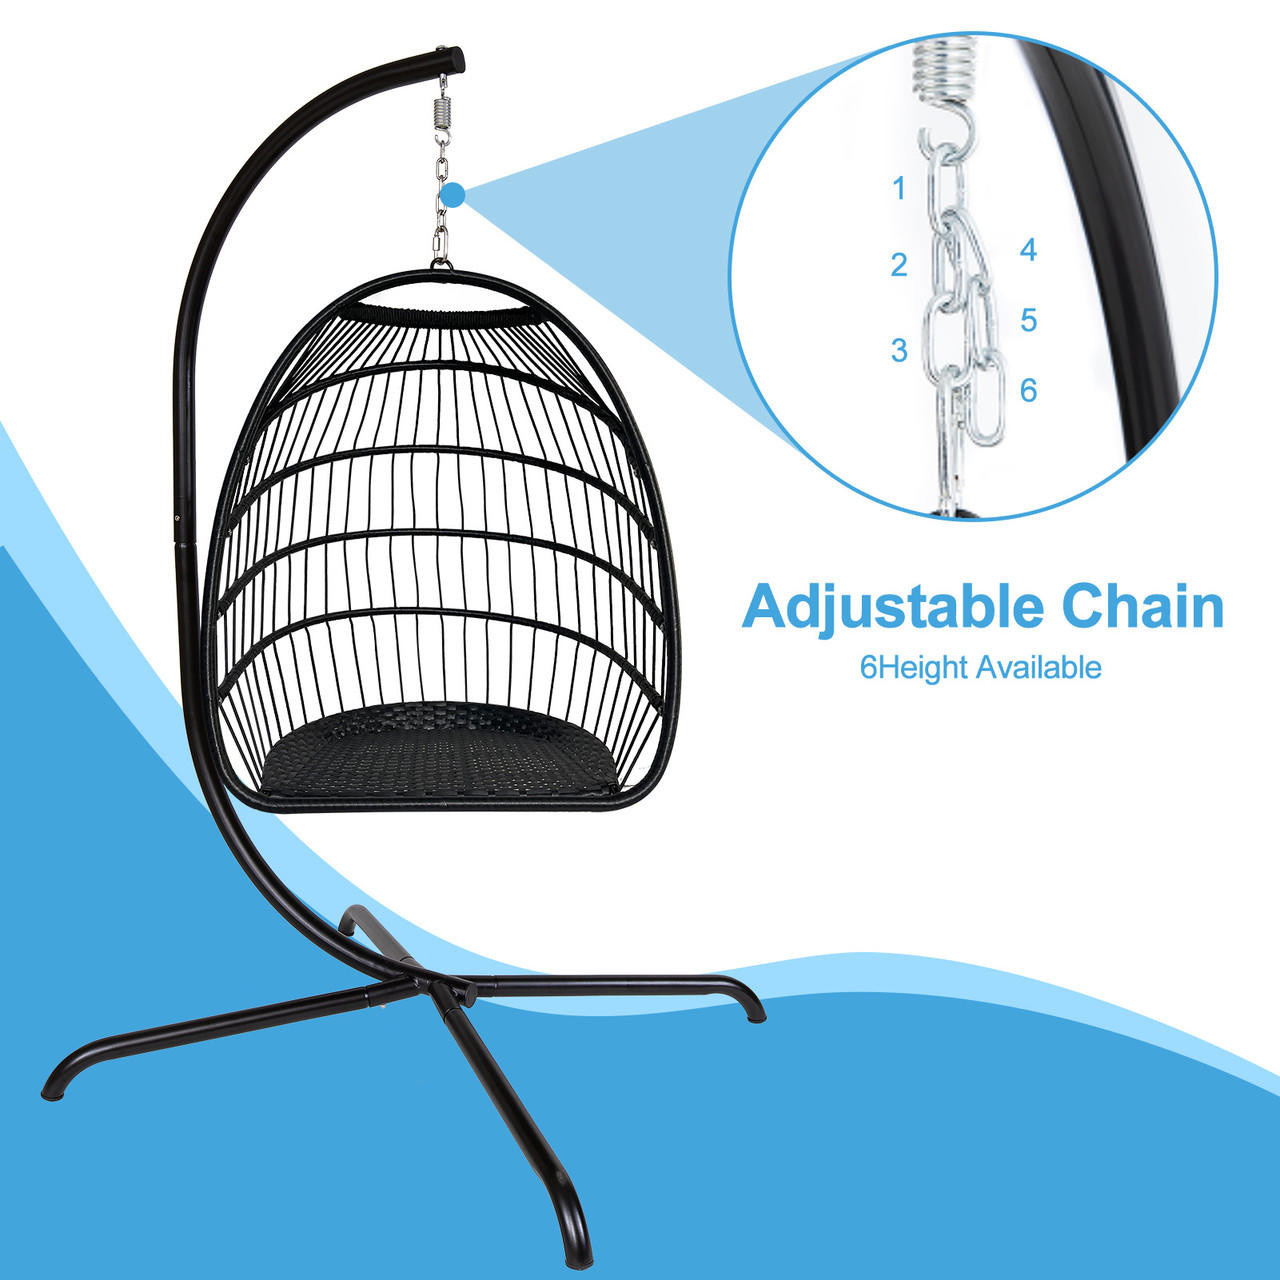 Chicken Pieces Swing Egg Hanging Chair with Cushion, Pillow & Stand for Indoor/Outdoor Use 